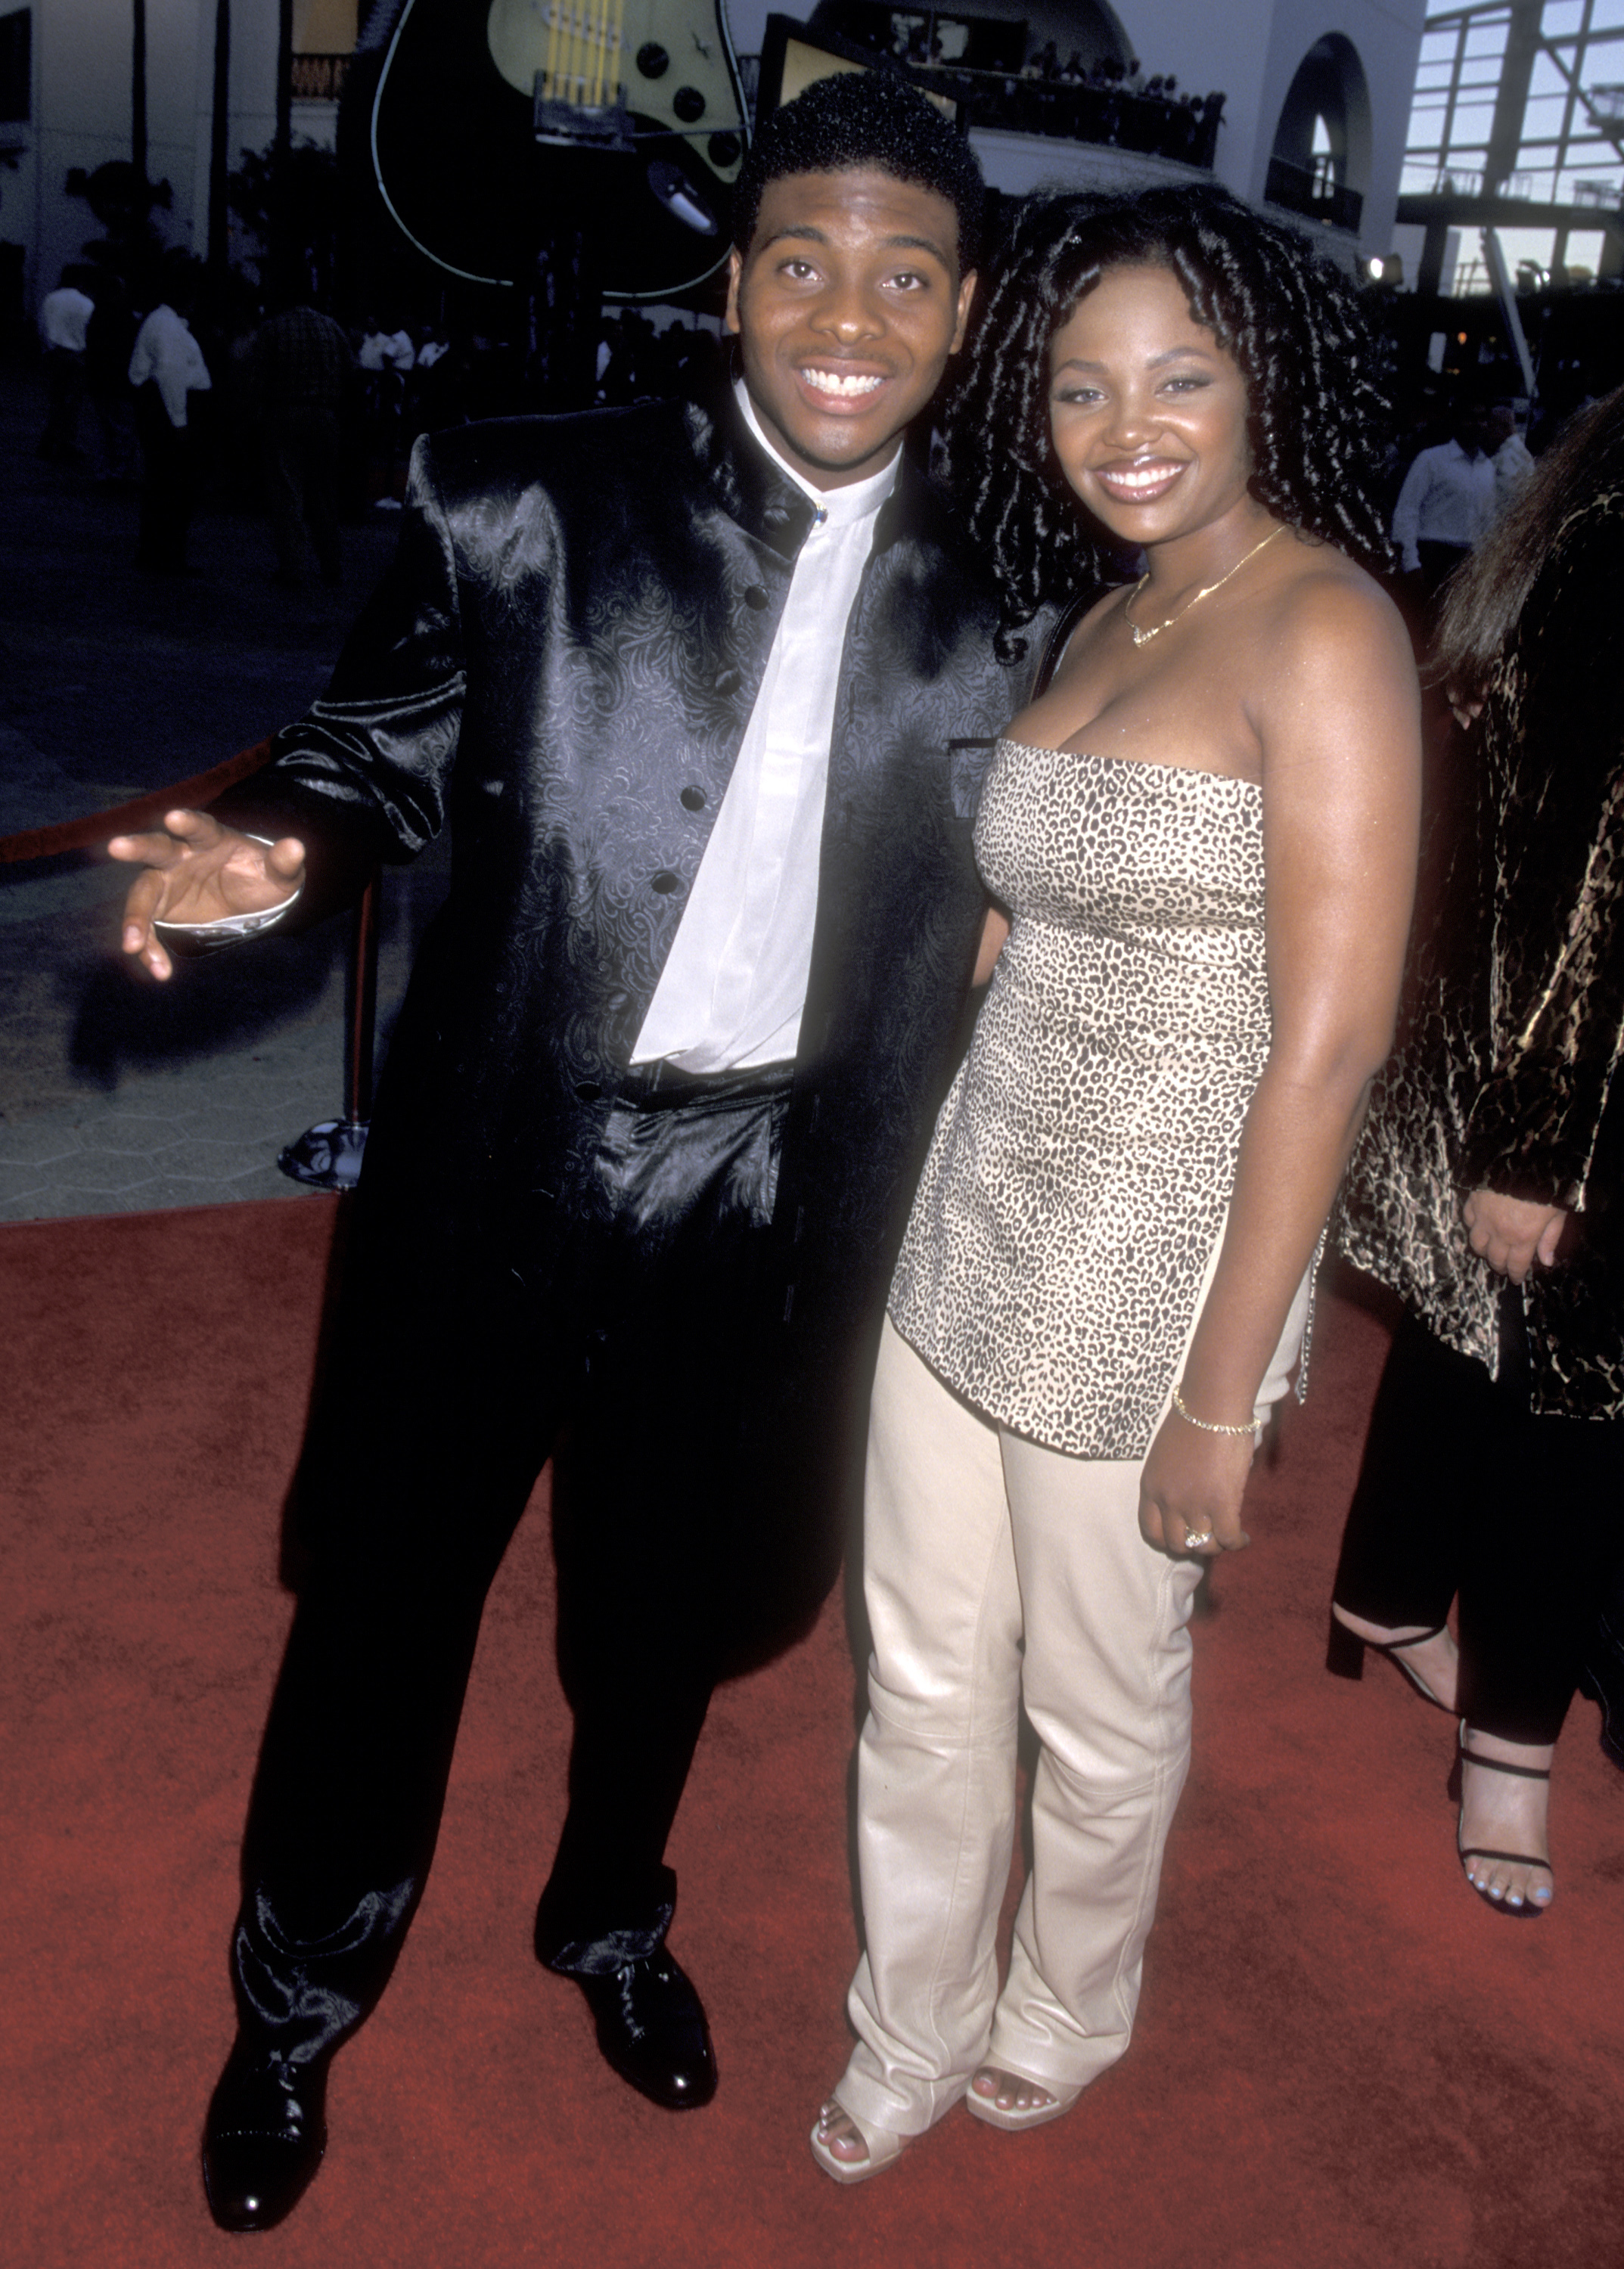 Kel and Tyisha pictured together at an event in July 1999